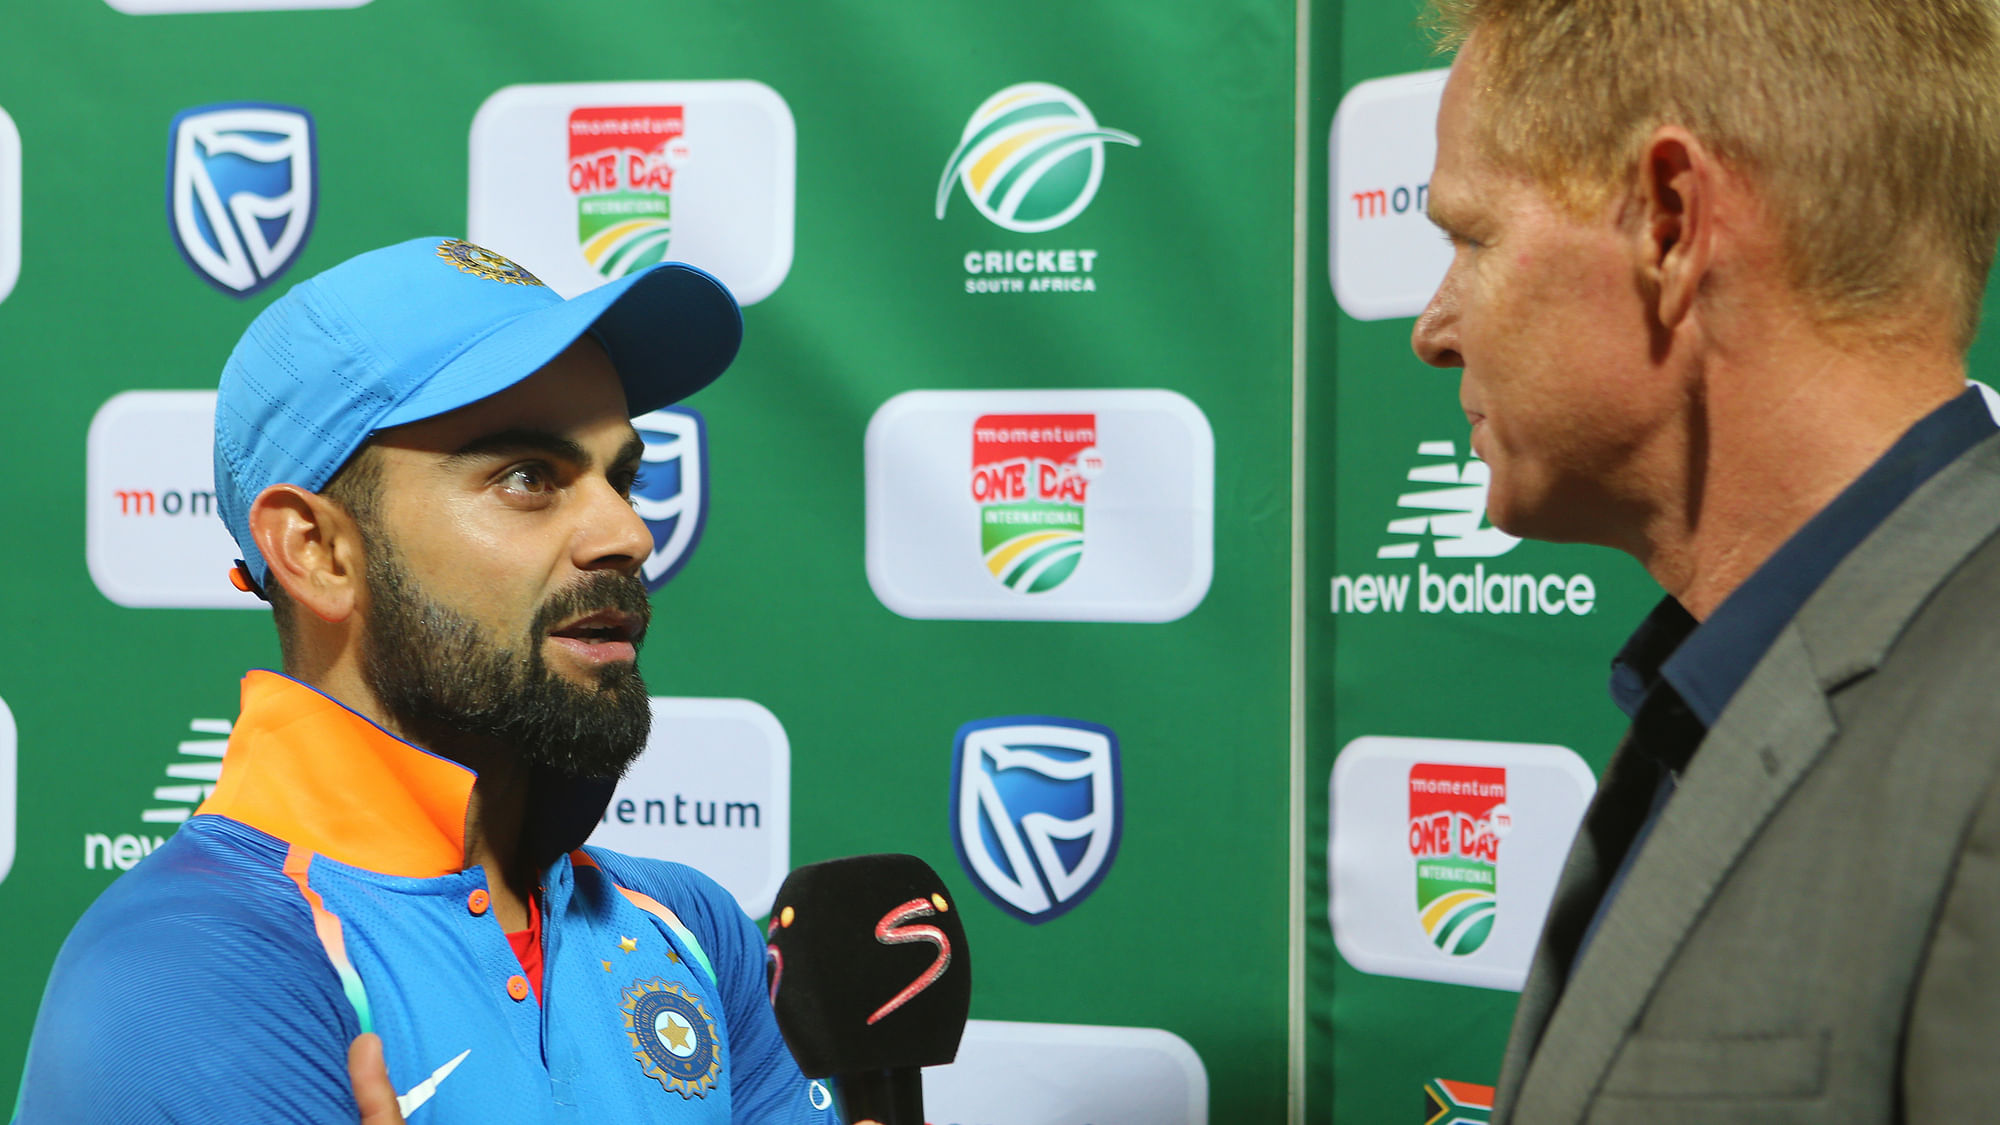 ‘My wife has kept me going throughout the tour,’ said Virat Kohli after India’s ODI series win over South Africa.